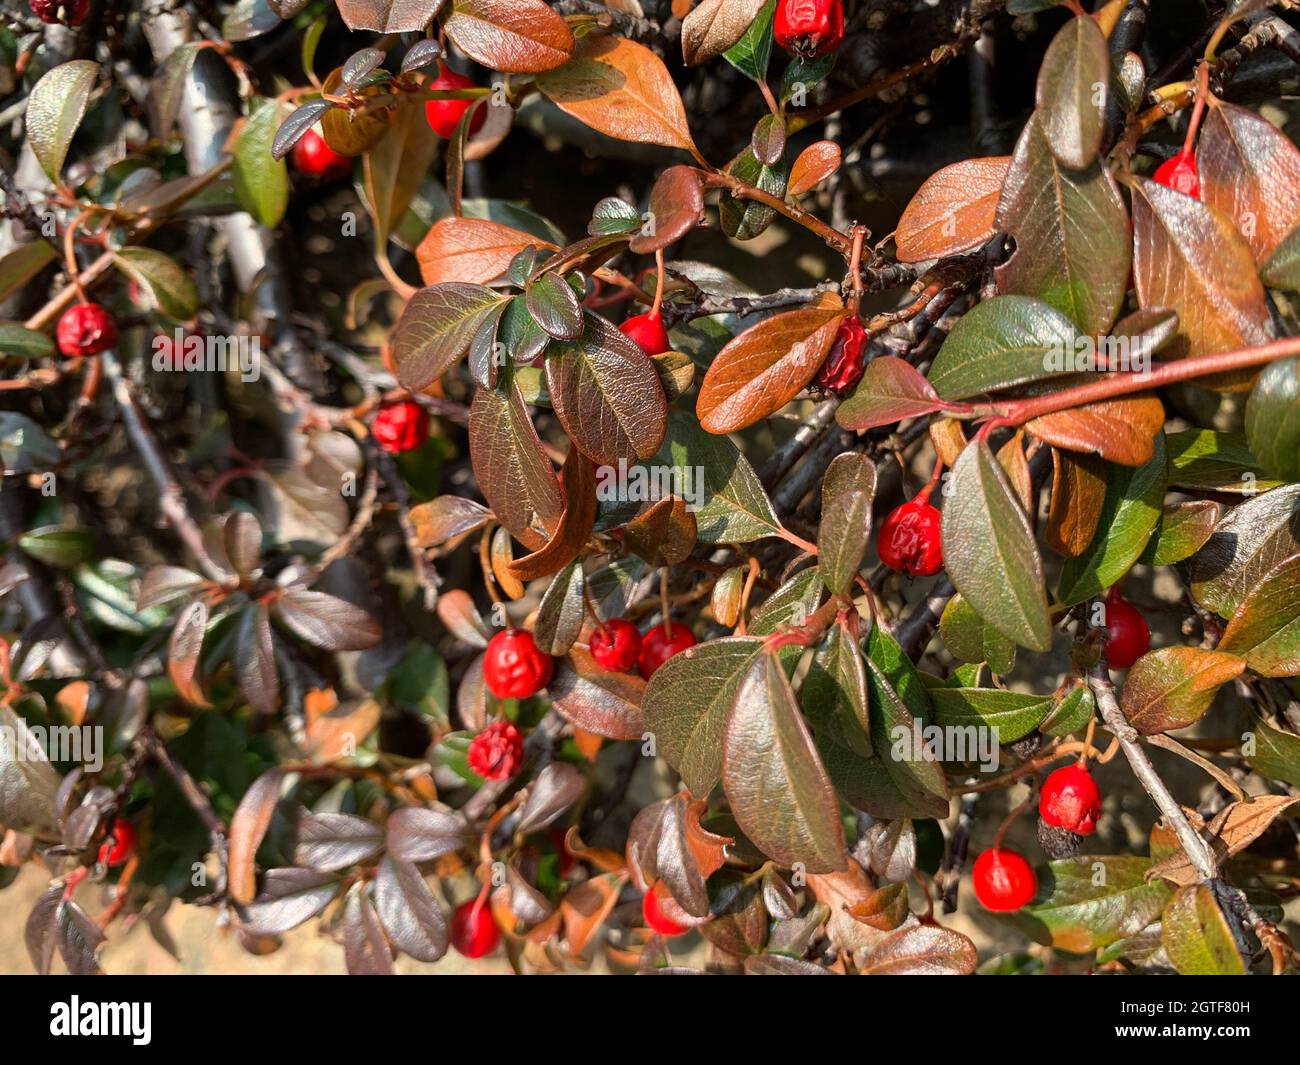 Close-up Of Fruits Growing On Tree Stock Photo